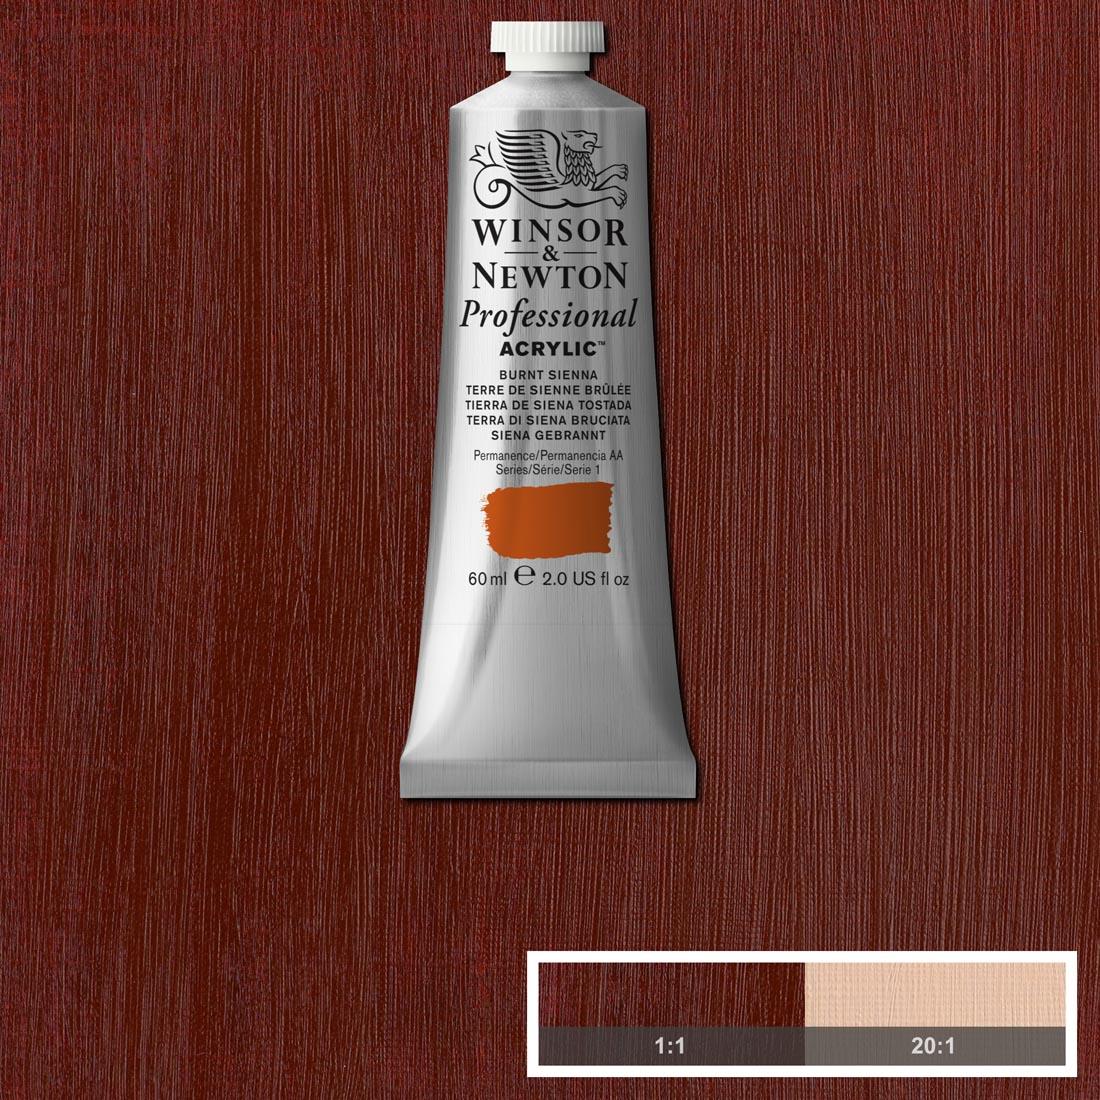 Tube of Winsor and Newton Professional Acrylic Burnt Sienna with paint swatch in the background